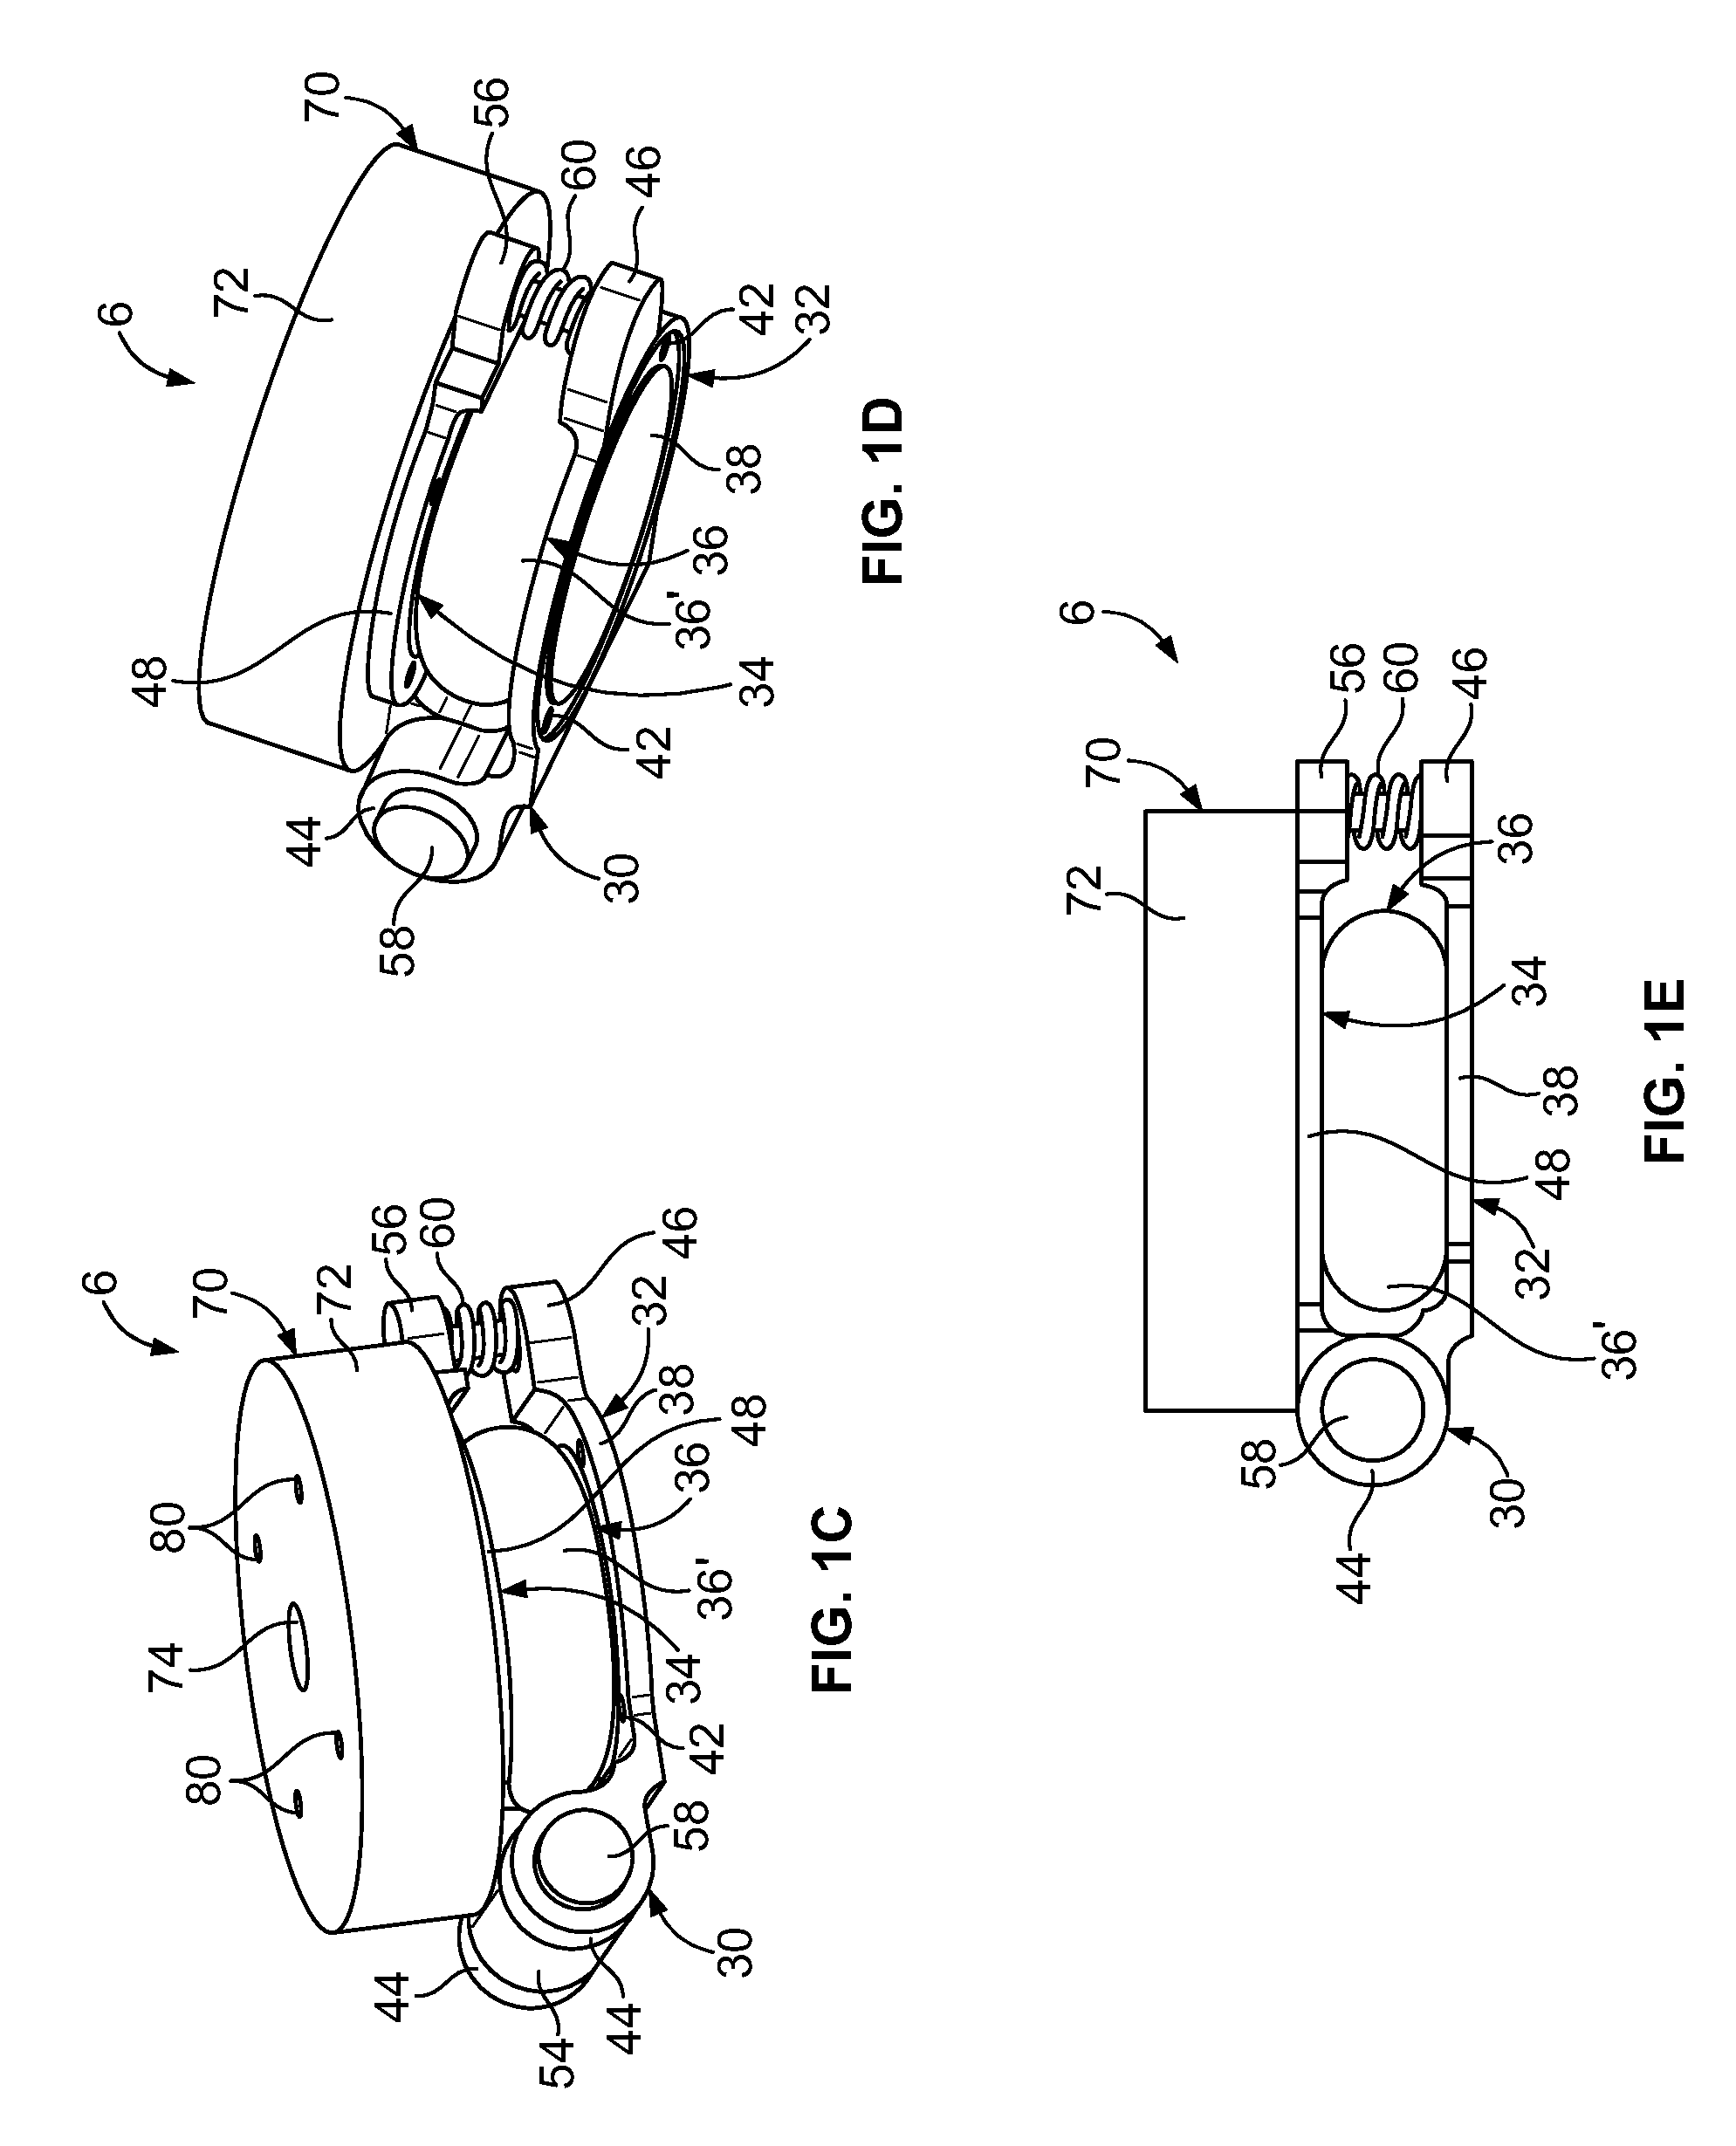 Vacuum pump systems for prosthetic limbs and methods of using the same